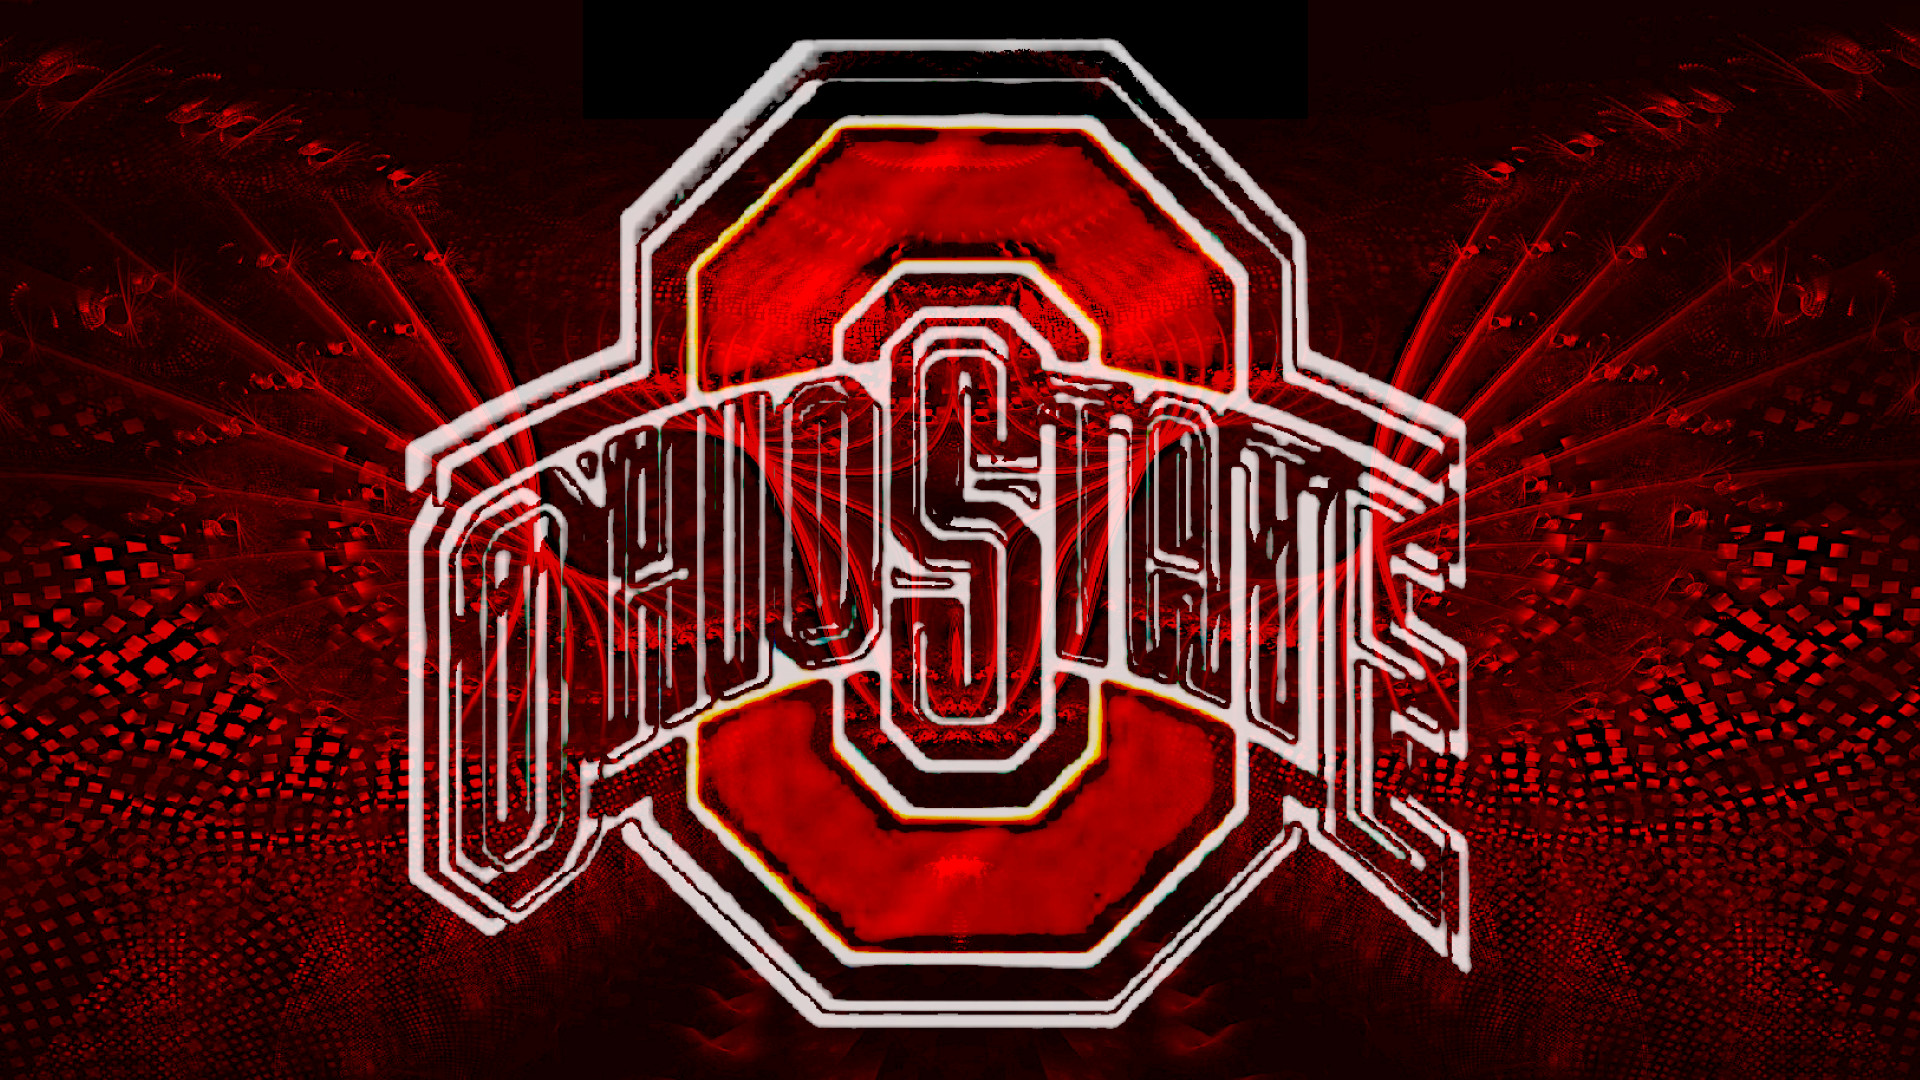 Ohio State Football Wallpaper HD Wallpapers Pinterest Wallpaper and Hd wallpaper